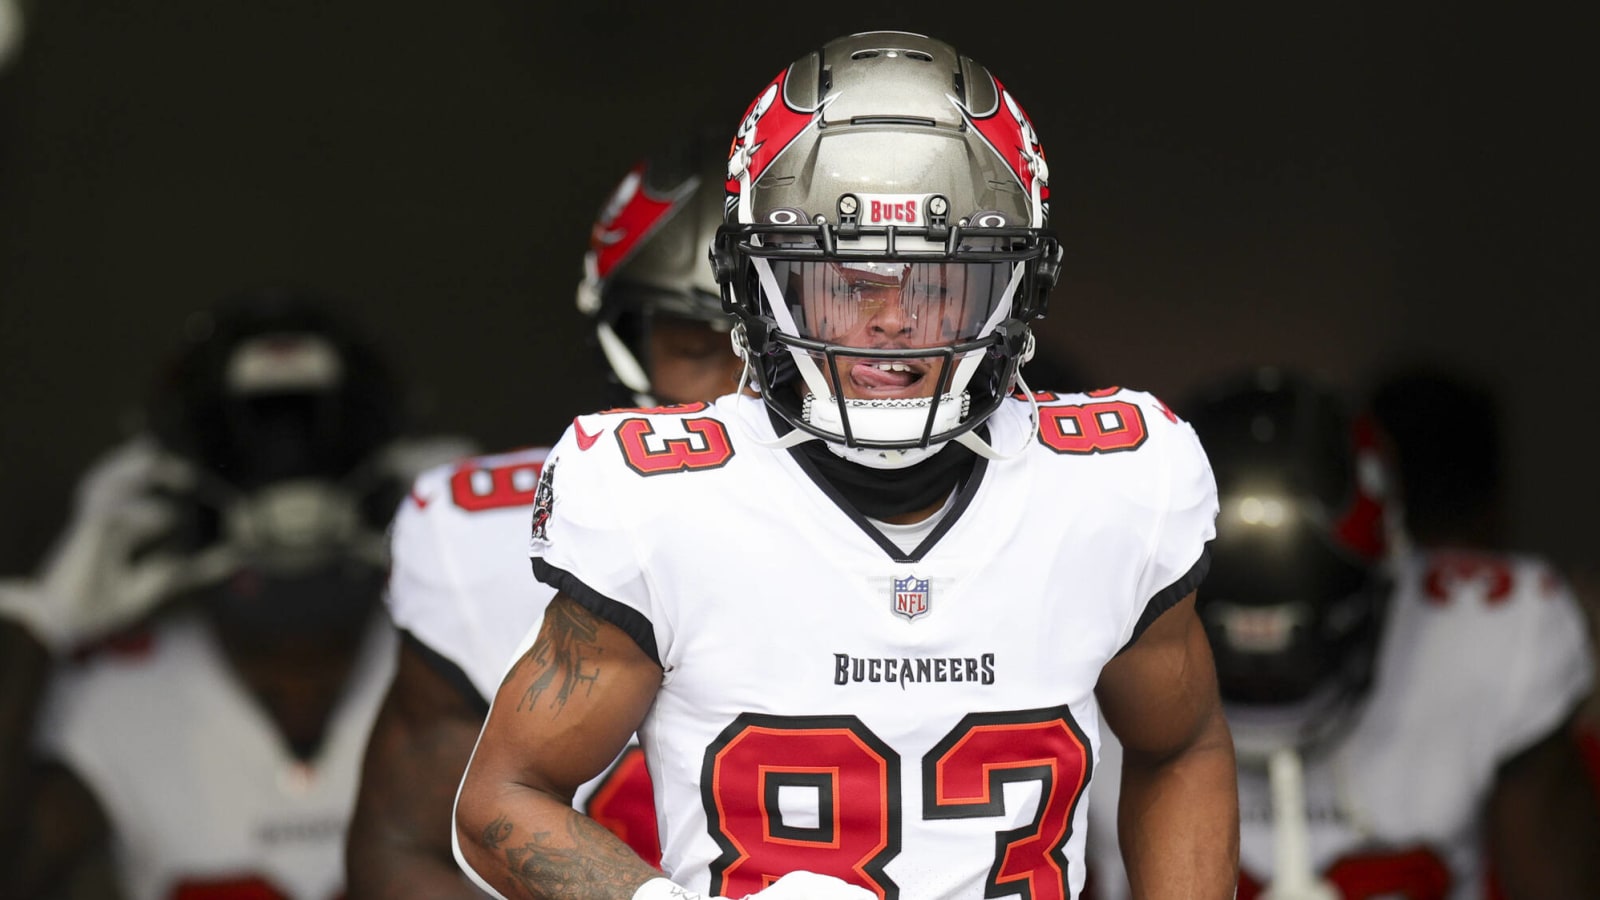 Buccaneers Sign Two Players to One-Year Contracts